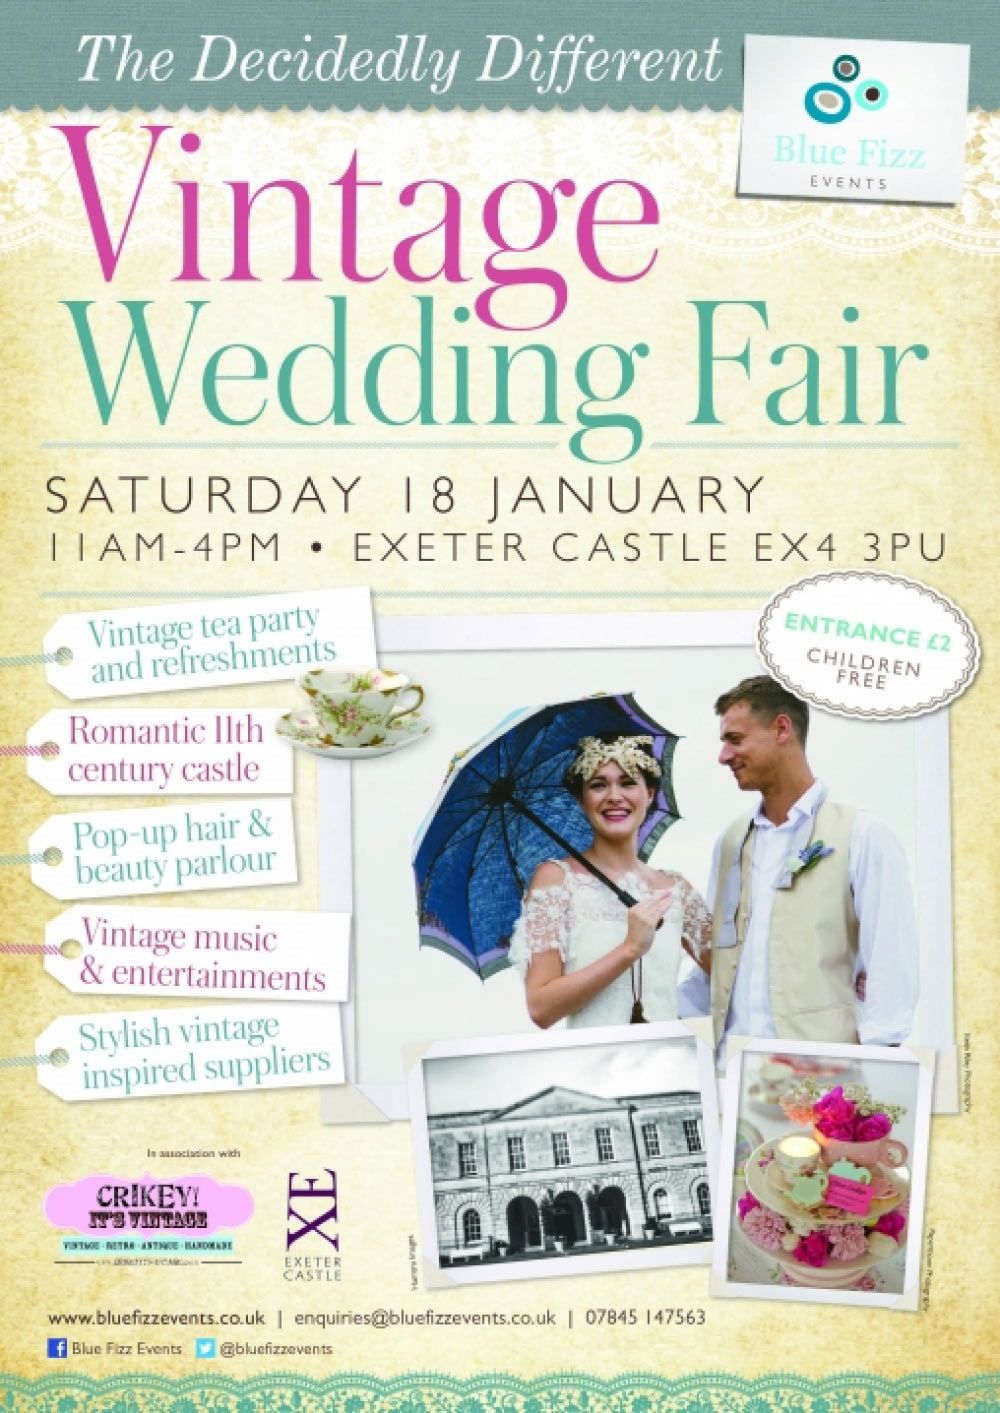 The Decidedly Different Vintage Wedding Fair at Exeter Castle